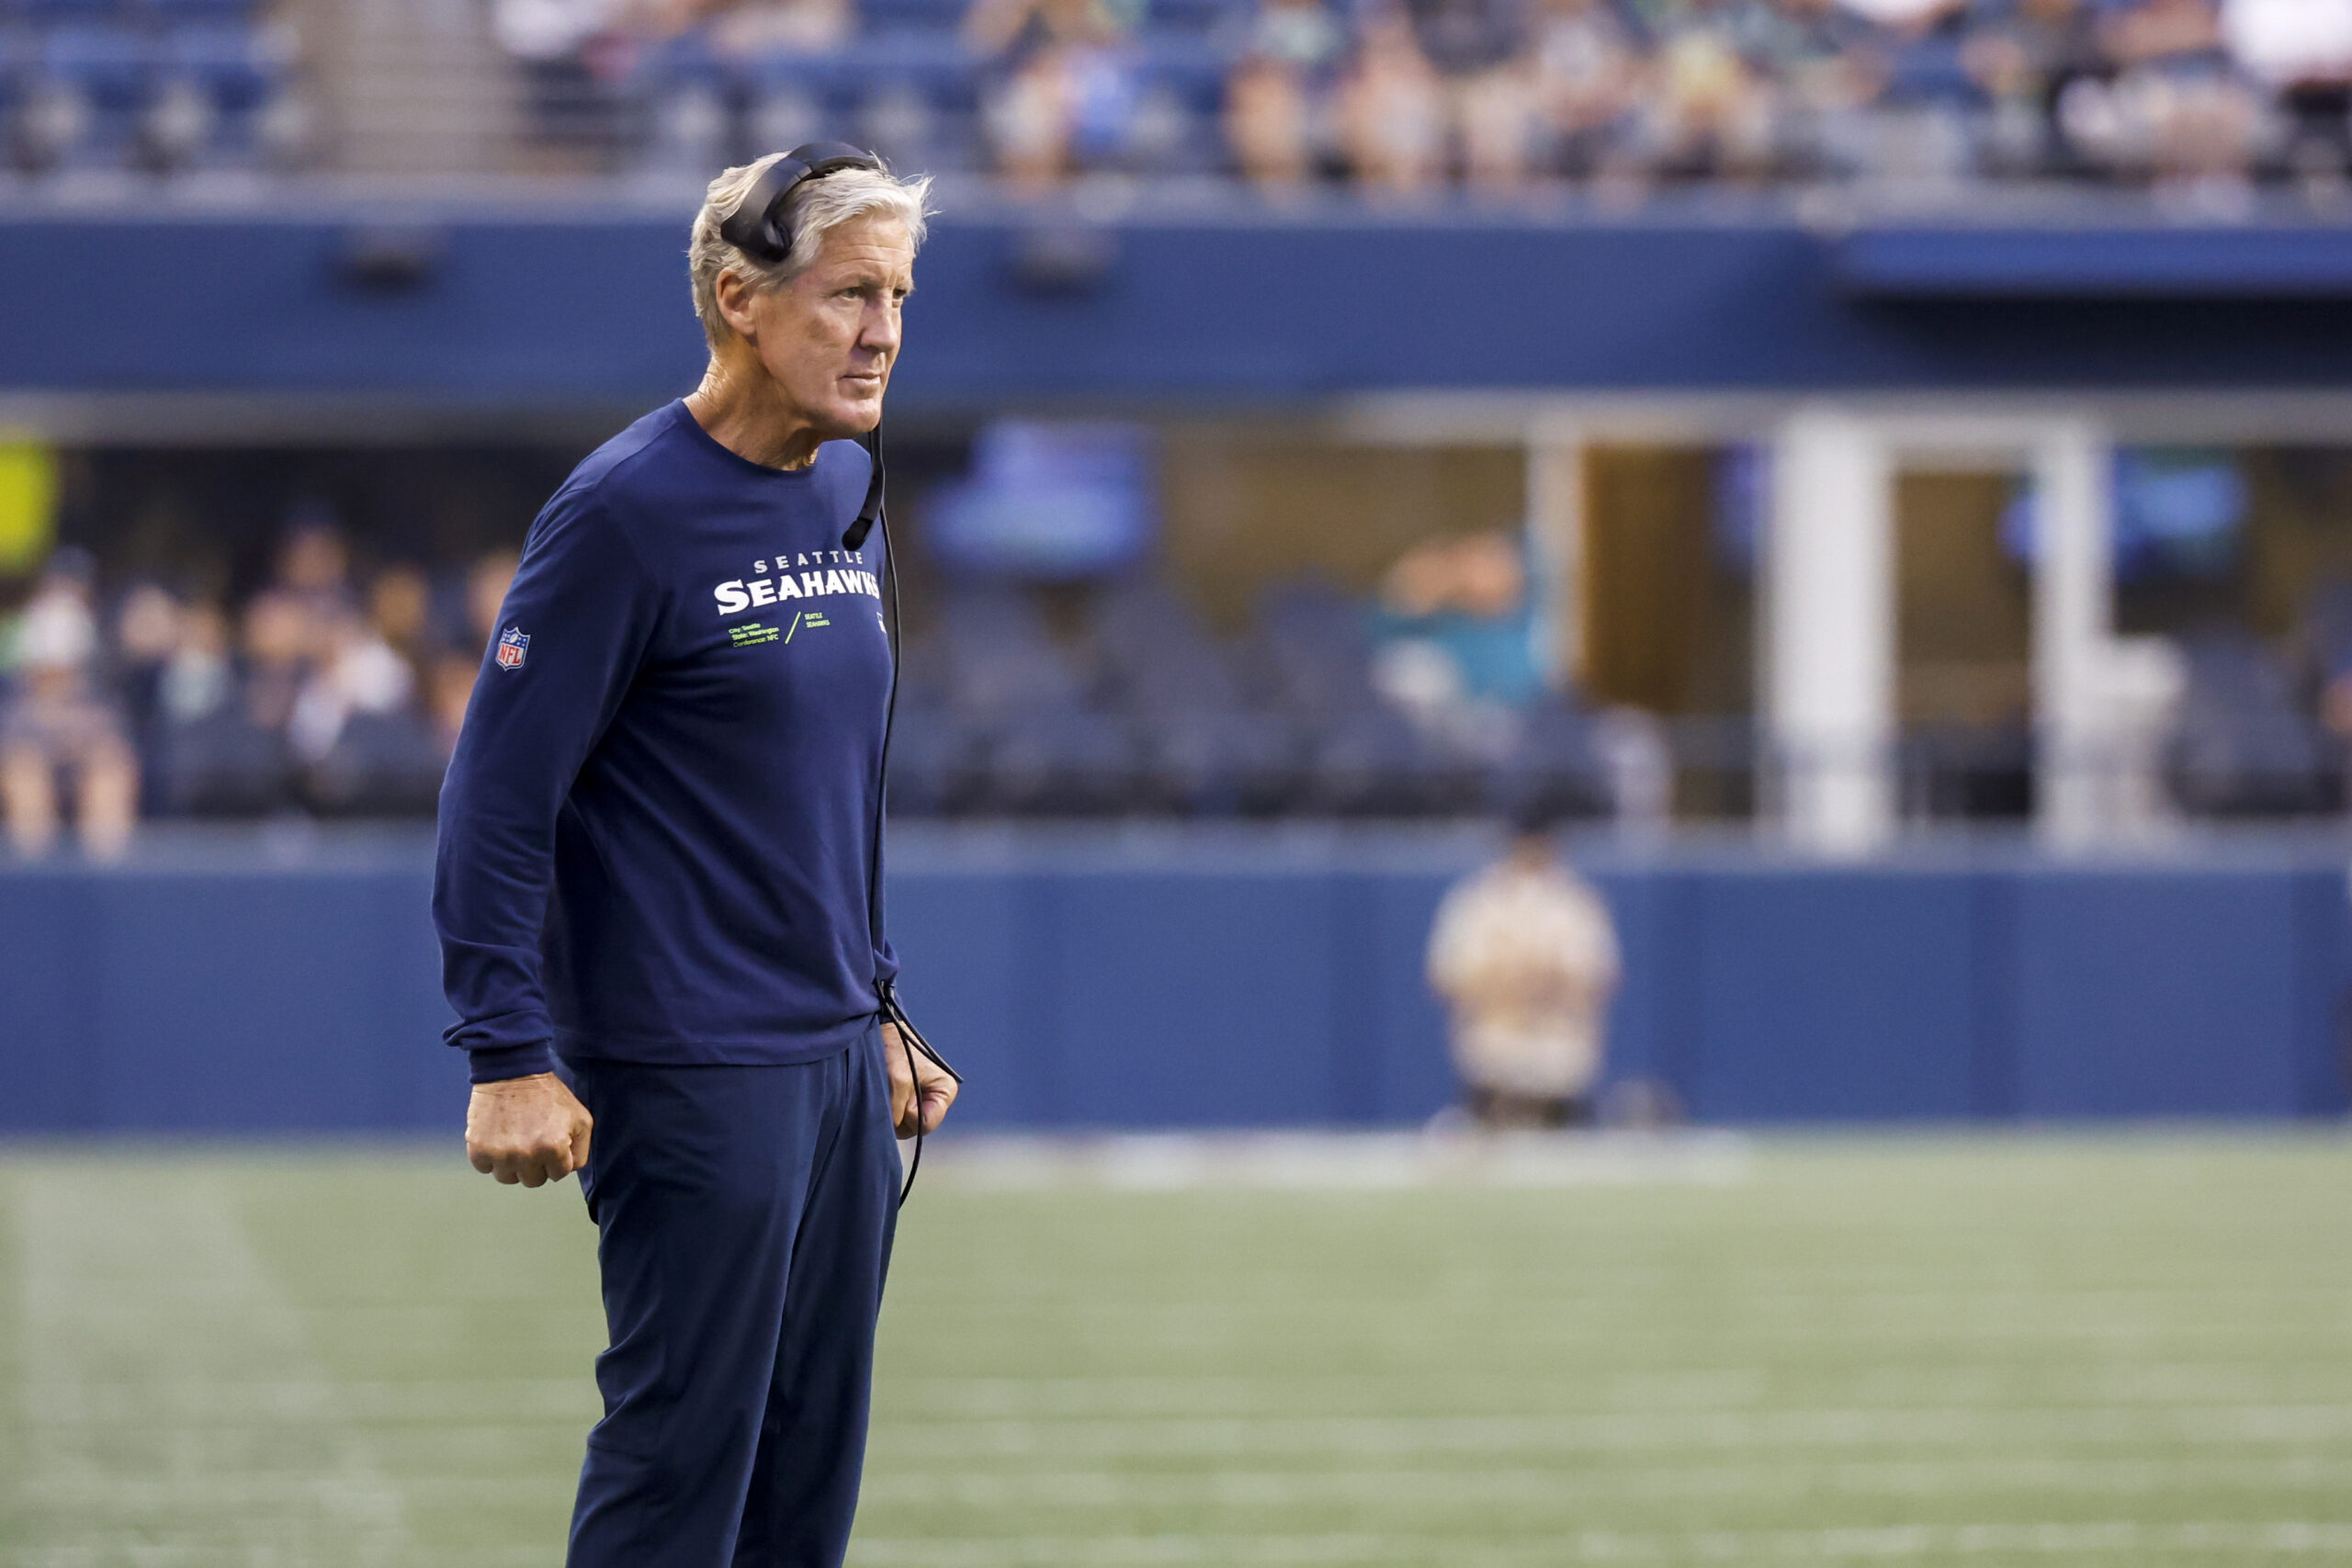 Pete Carroll on Seahawks’ 2nd preseason loss: ‘We’ll learn from this’